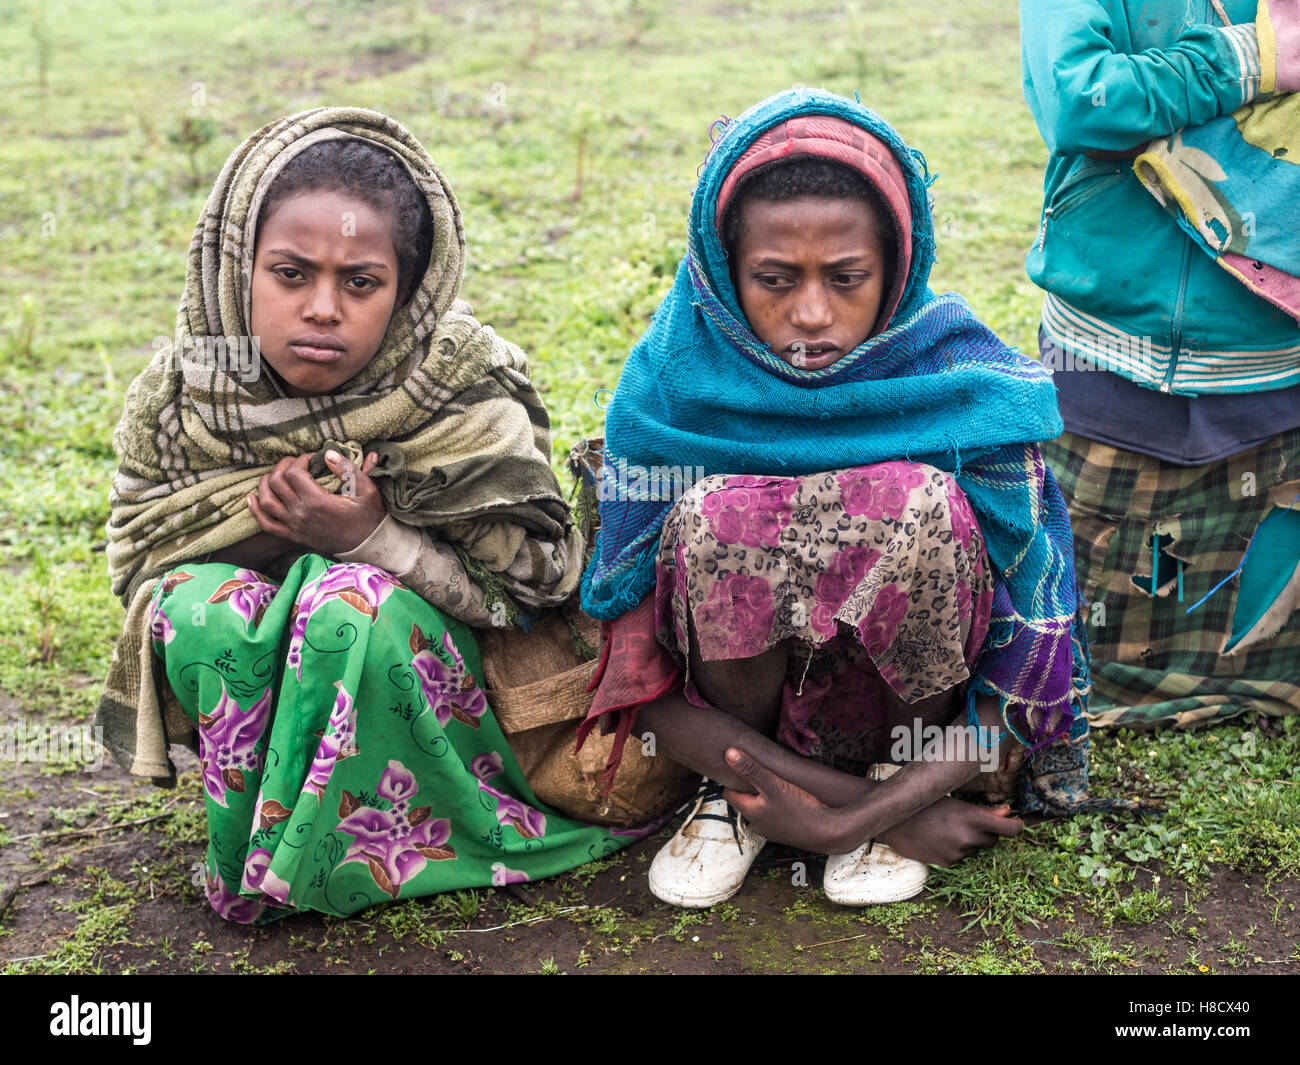 Girls selling souvenirs in Semien Mountains, Ethiopia, on a foggy day. Stock Photo